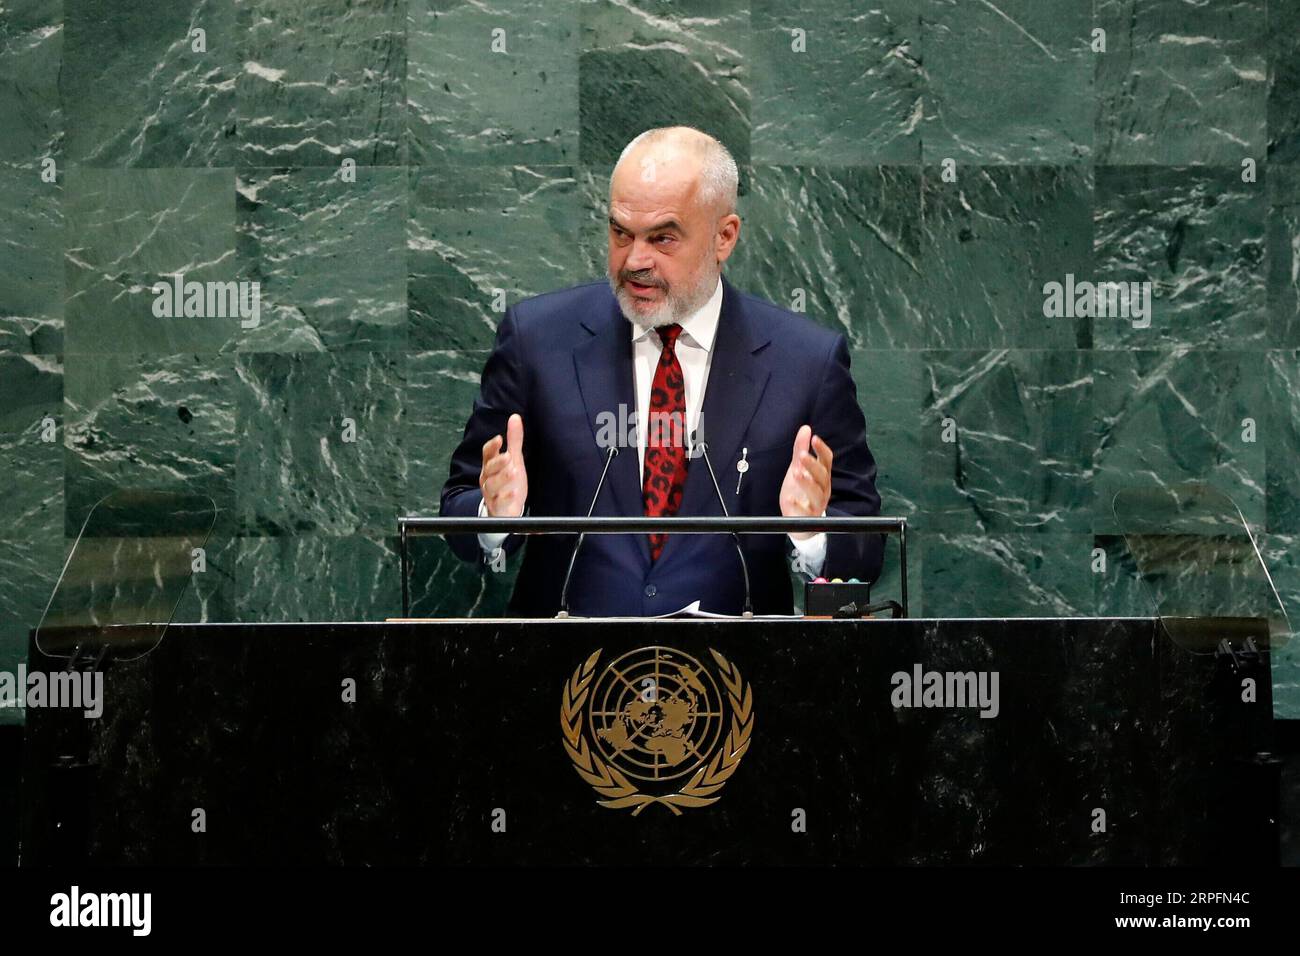 190928 -- UNITED NATIONS, Sept. 28, 2019 -- Albanian Prime Minister Edi Rama addresses the General Debate of the 74th session of the UN General Assembly at the UN headquarters in New York, Sept. 27, 2019.  UN-GENERAL ASSEMBLY-GENERAL DEBATE LixMuzi PUBLICATIONxNOTxINxCHN Stock Photo